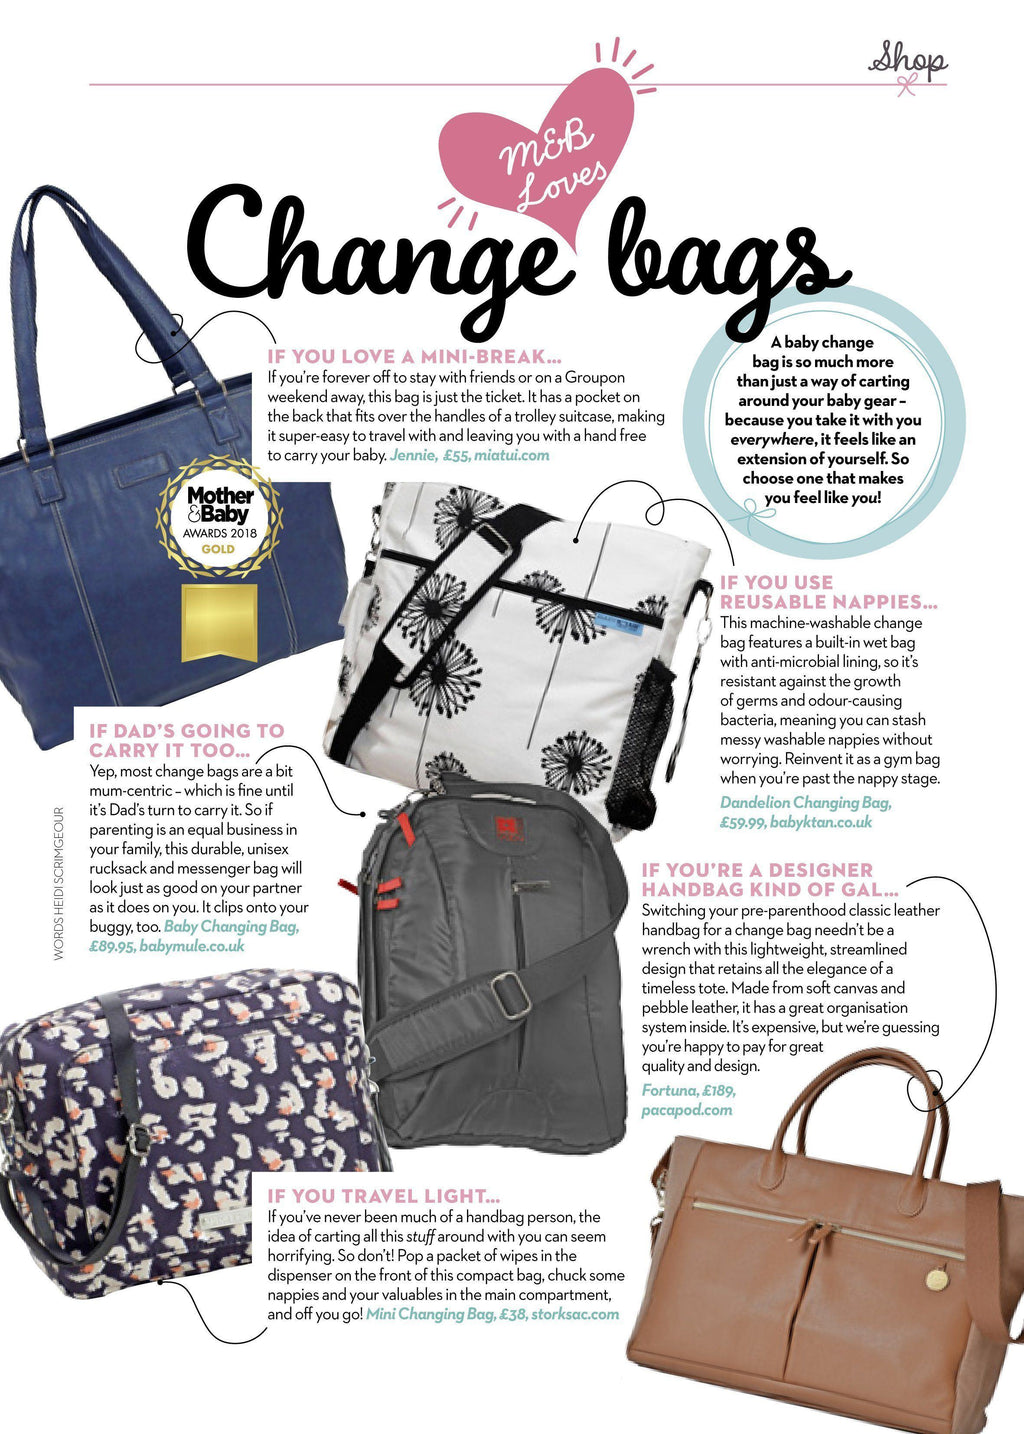 Mother & Baby magazine loves our Fortuna